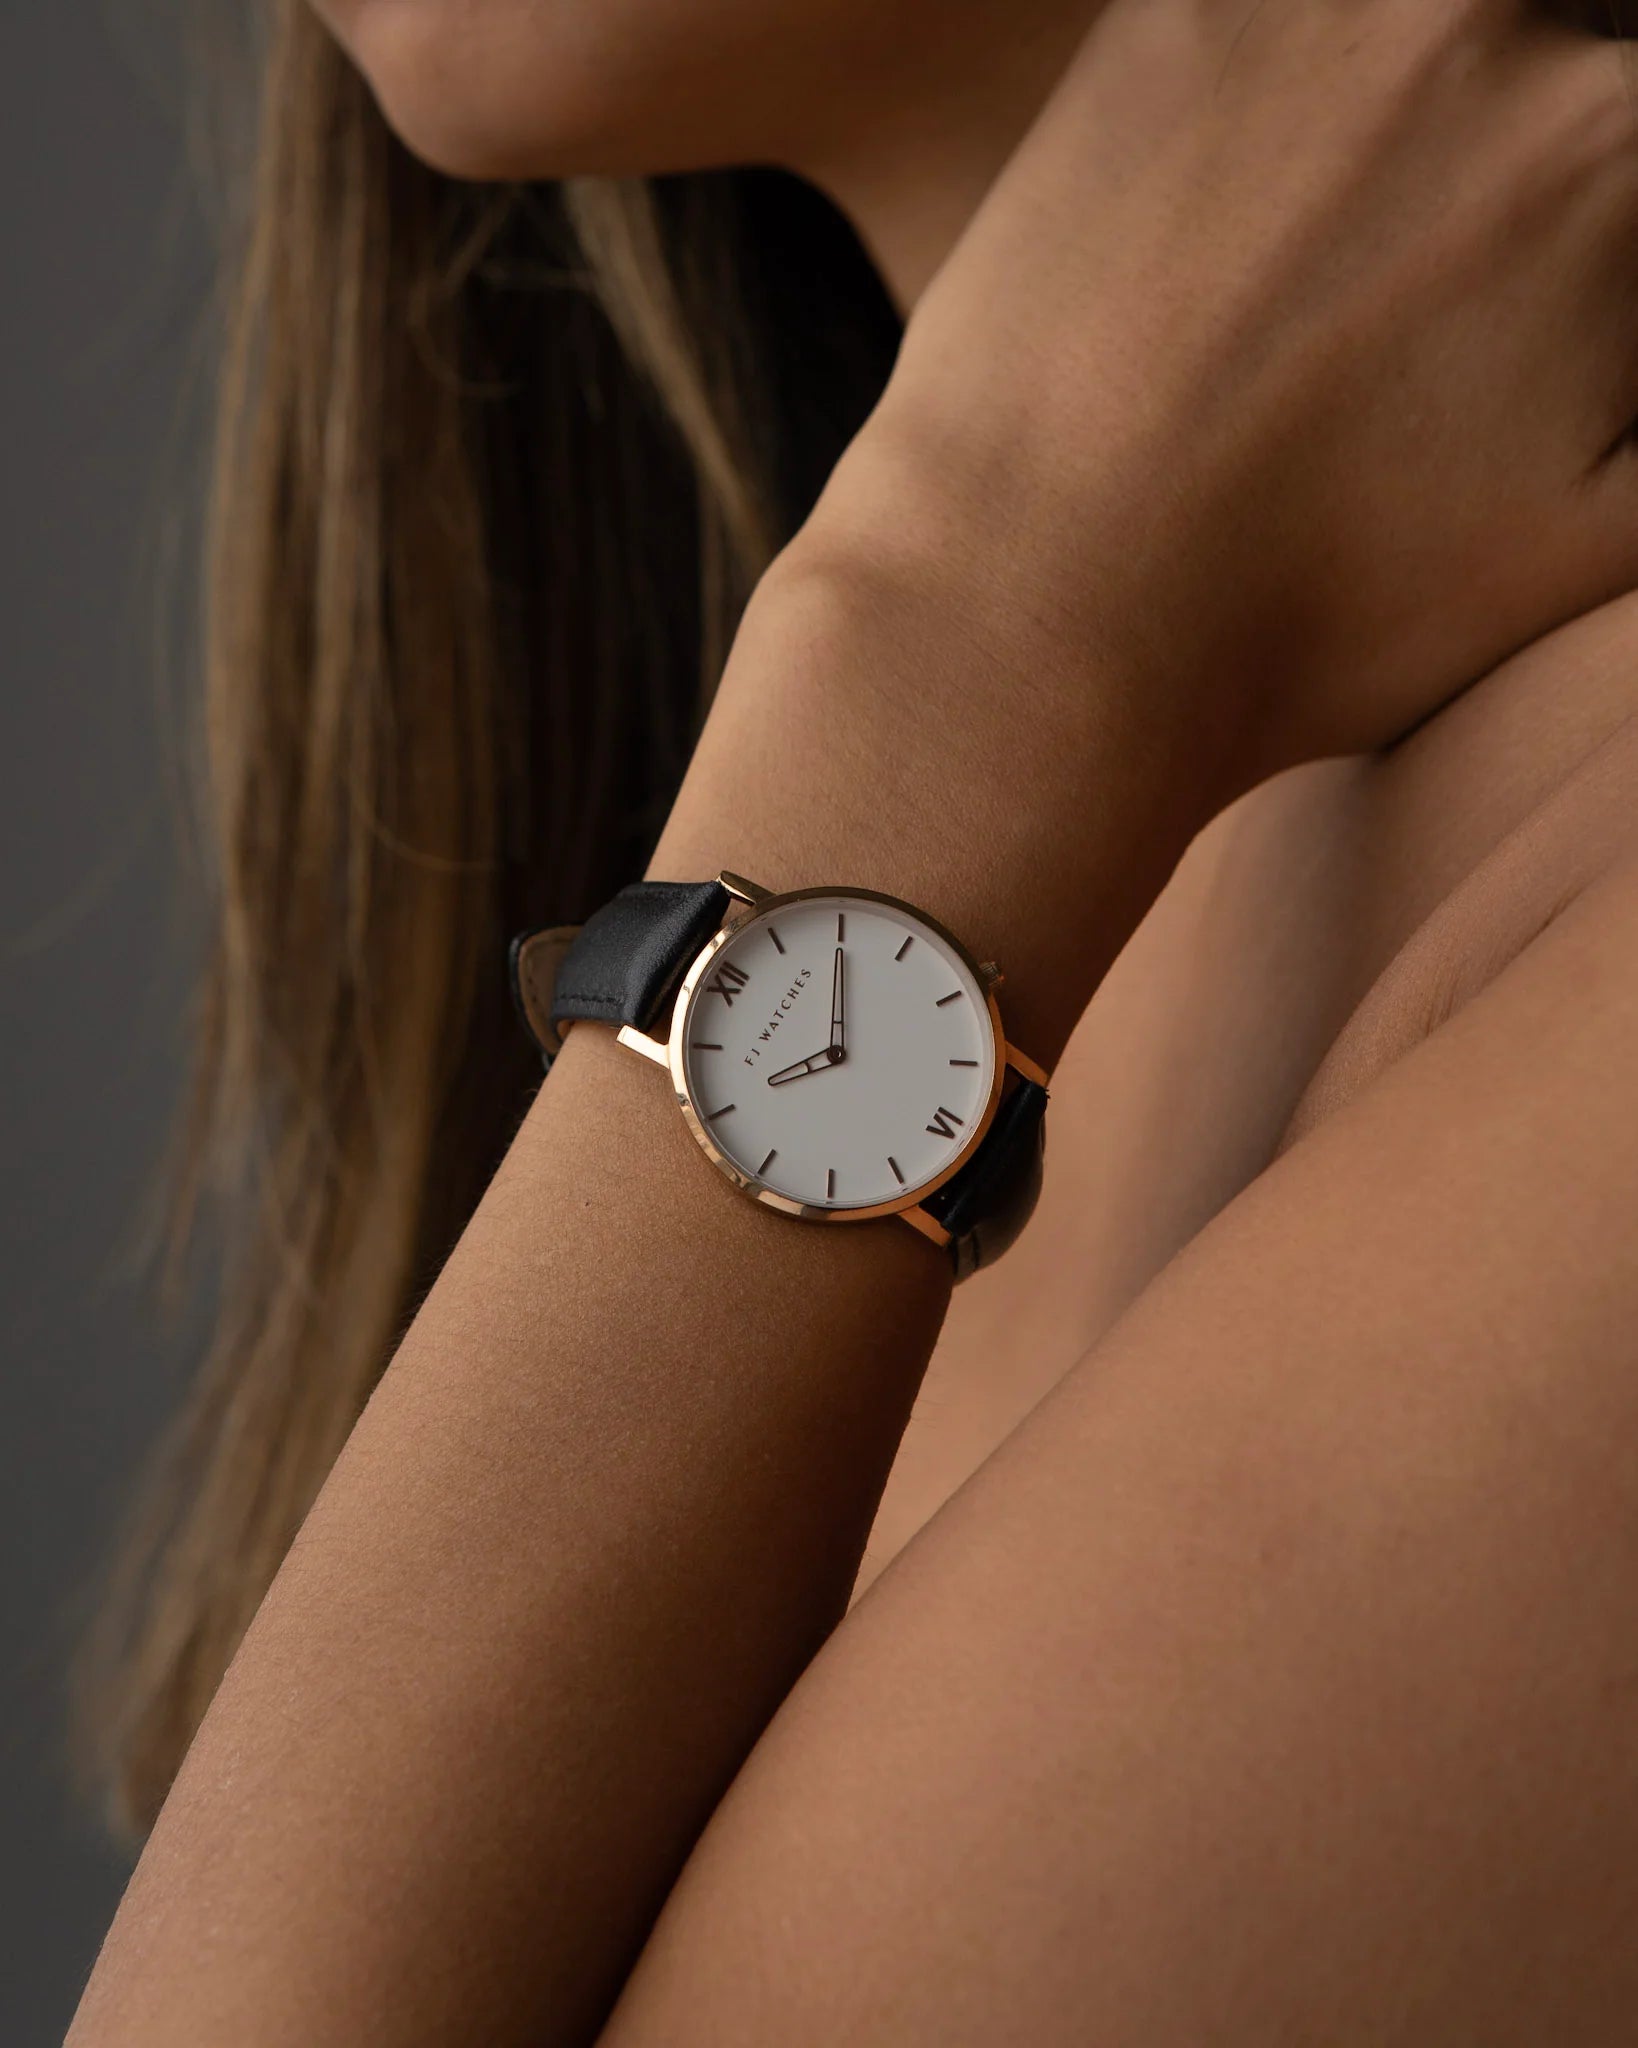 Discover the Golden Sun set, a 36mm men and women watch from Five Jwlry. Equipped with a minimalist white and rose gold dial. In this special edition, this watch comes with two leathers, one black leather and one white. The perfect gift!